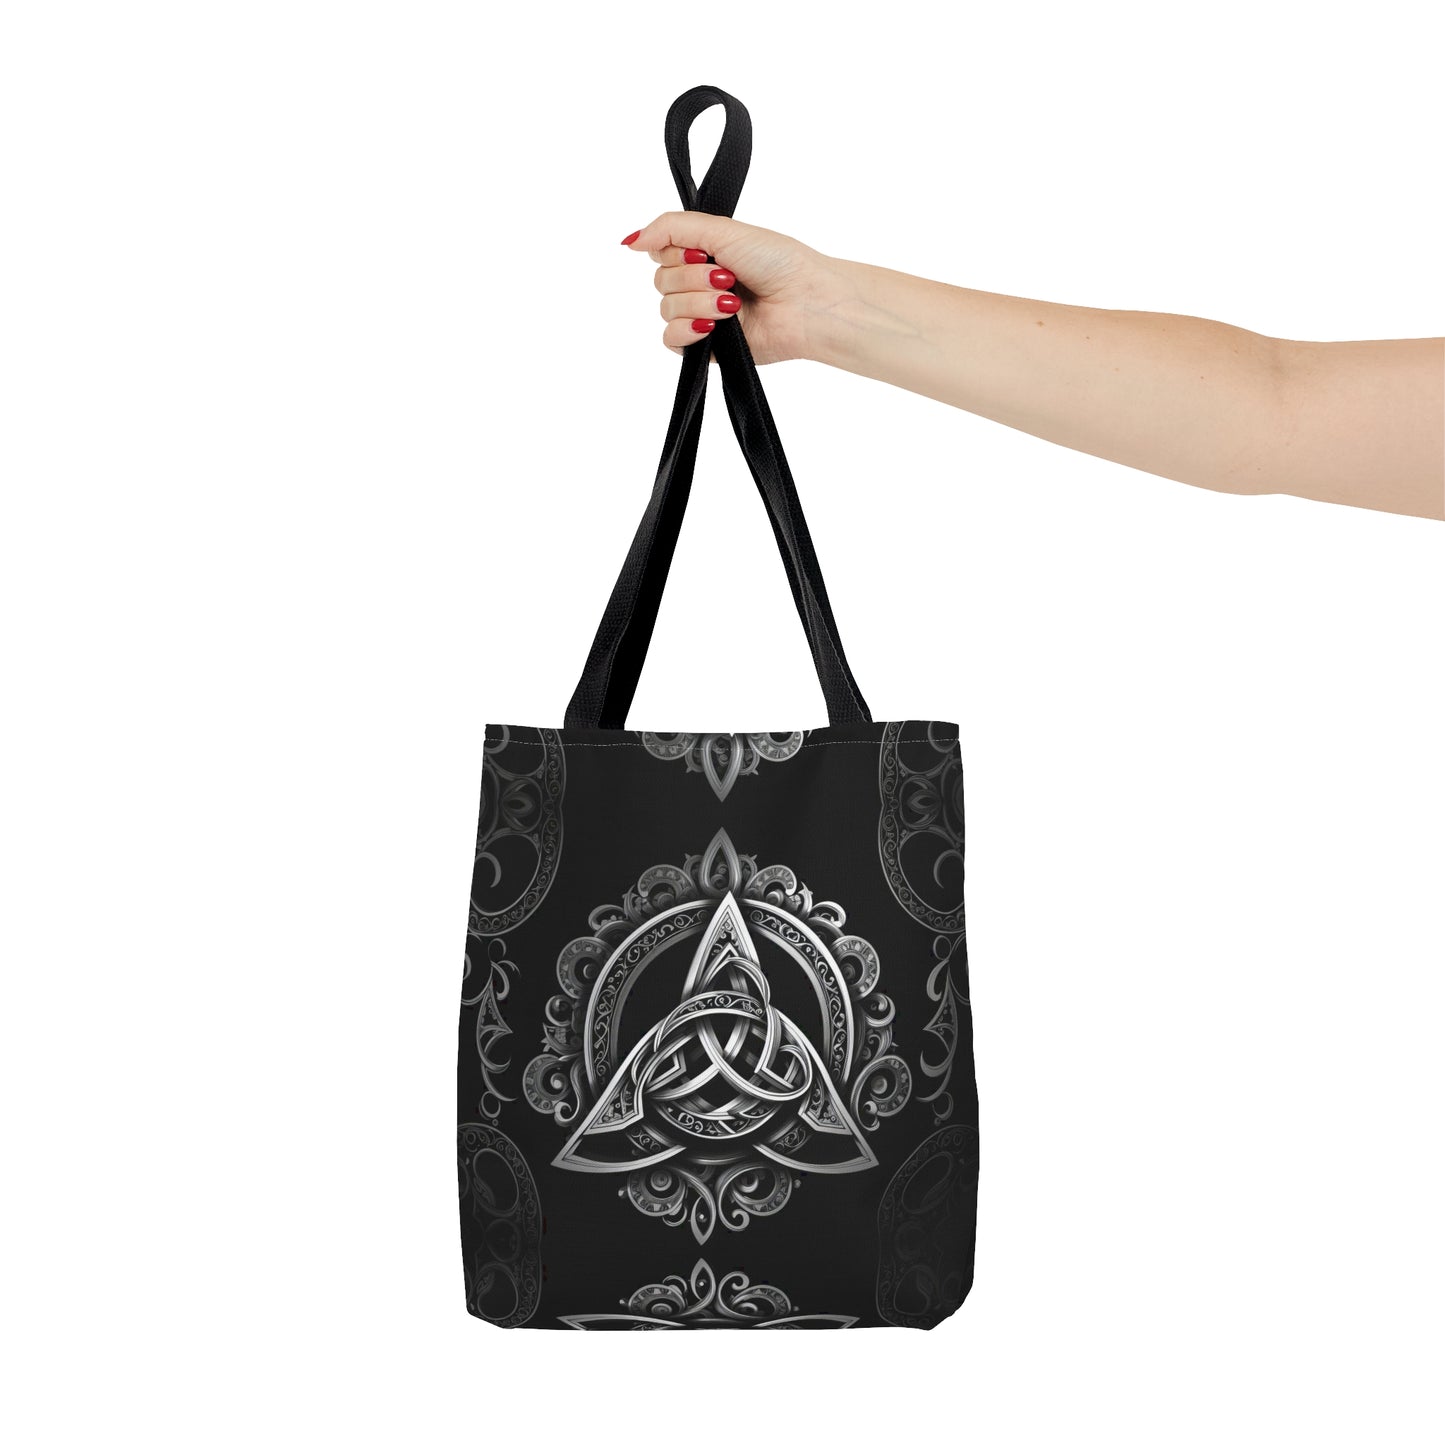 Triquetra Black Witch Tote Bag, Cute Celtic Trinity Knot Grocery Bag